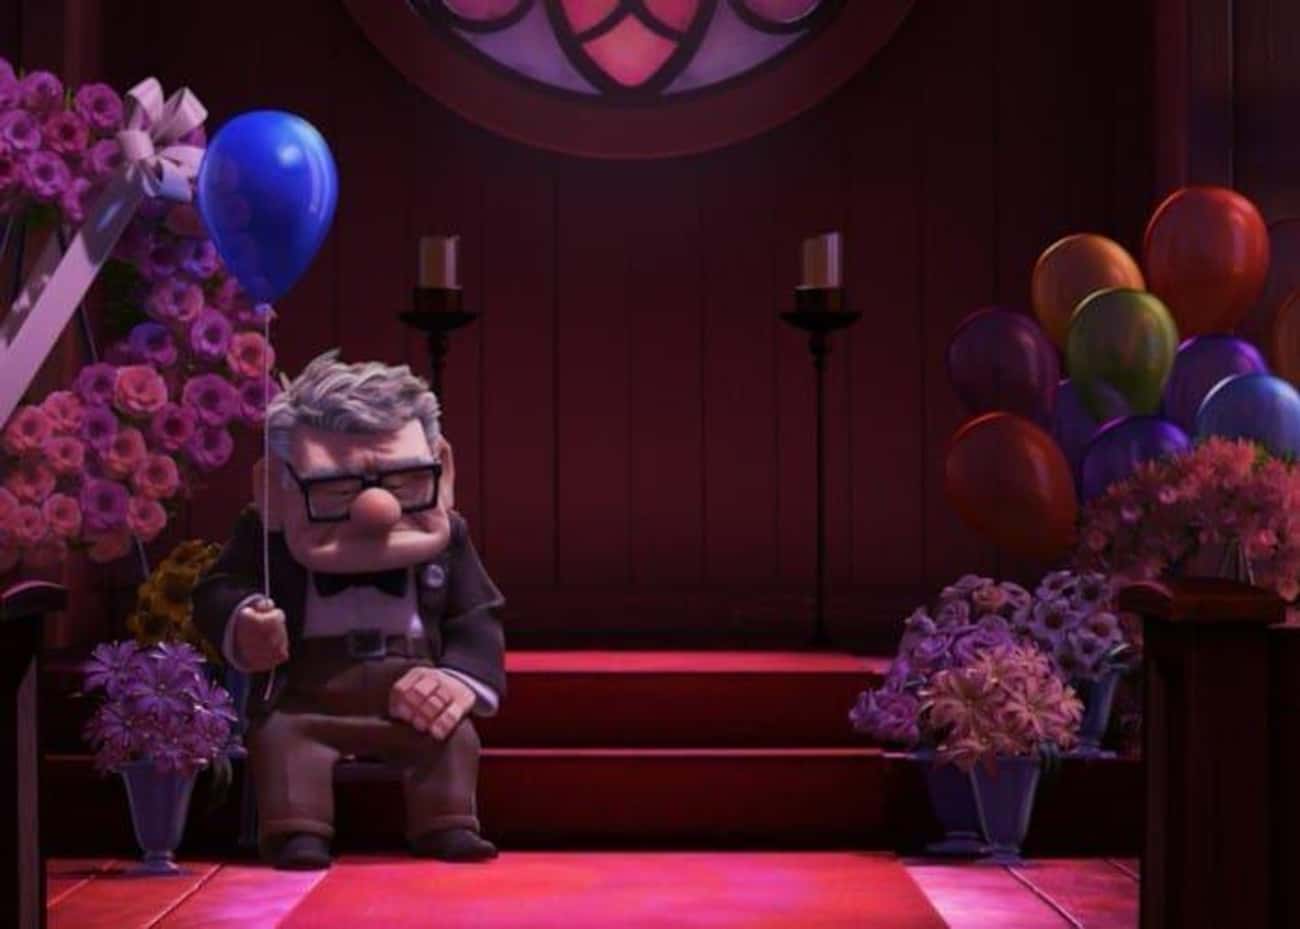 Pixar Takes The Audience Through An Entire Tragic Love Story In 'Up'